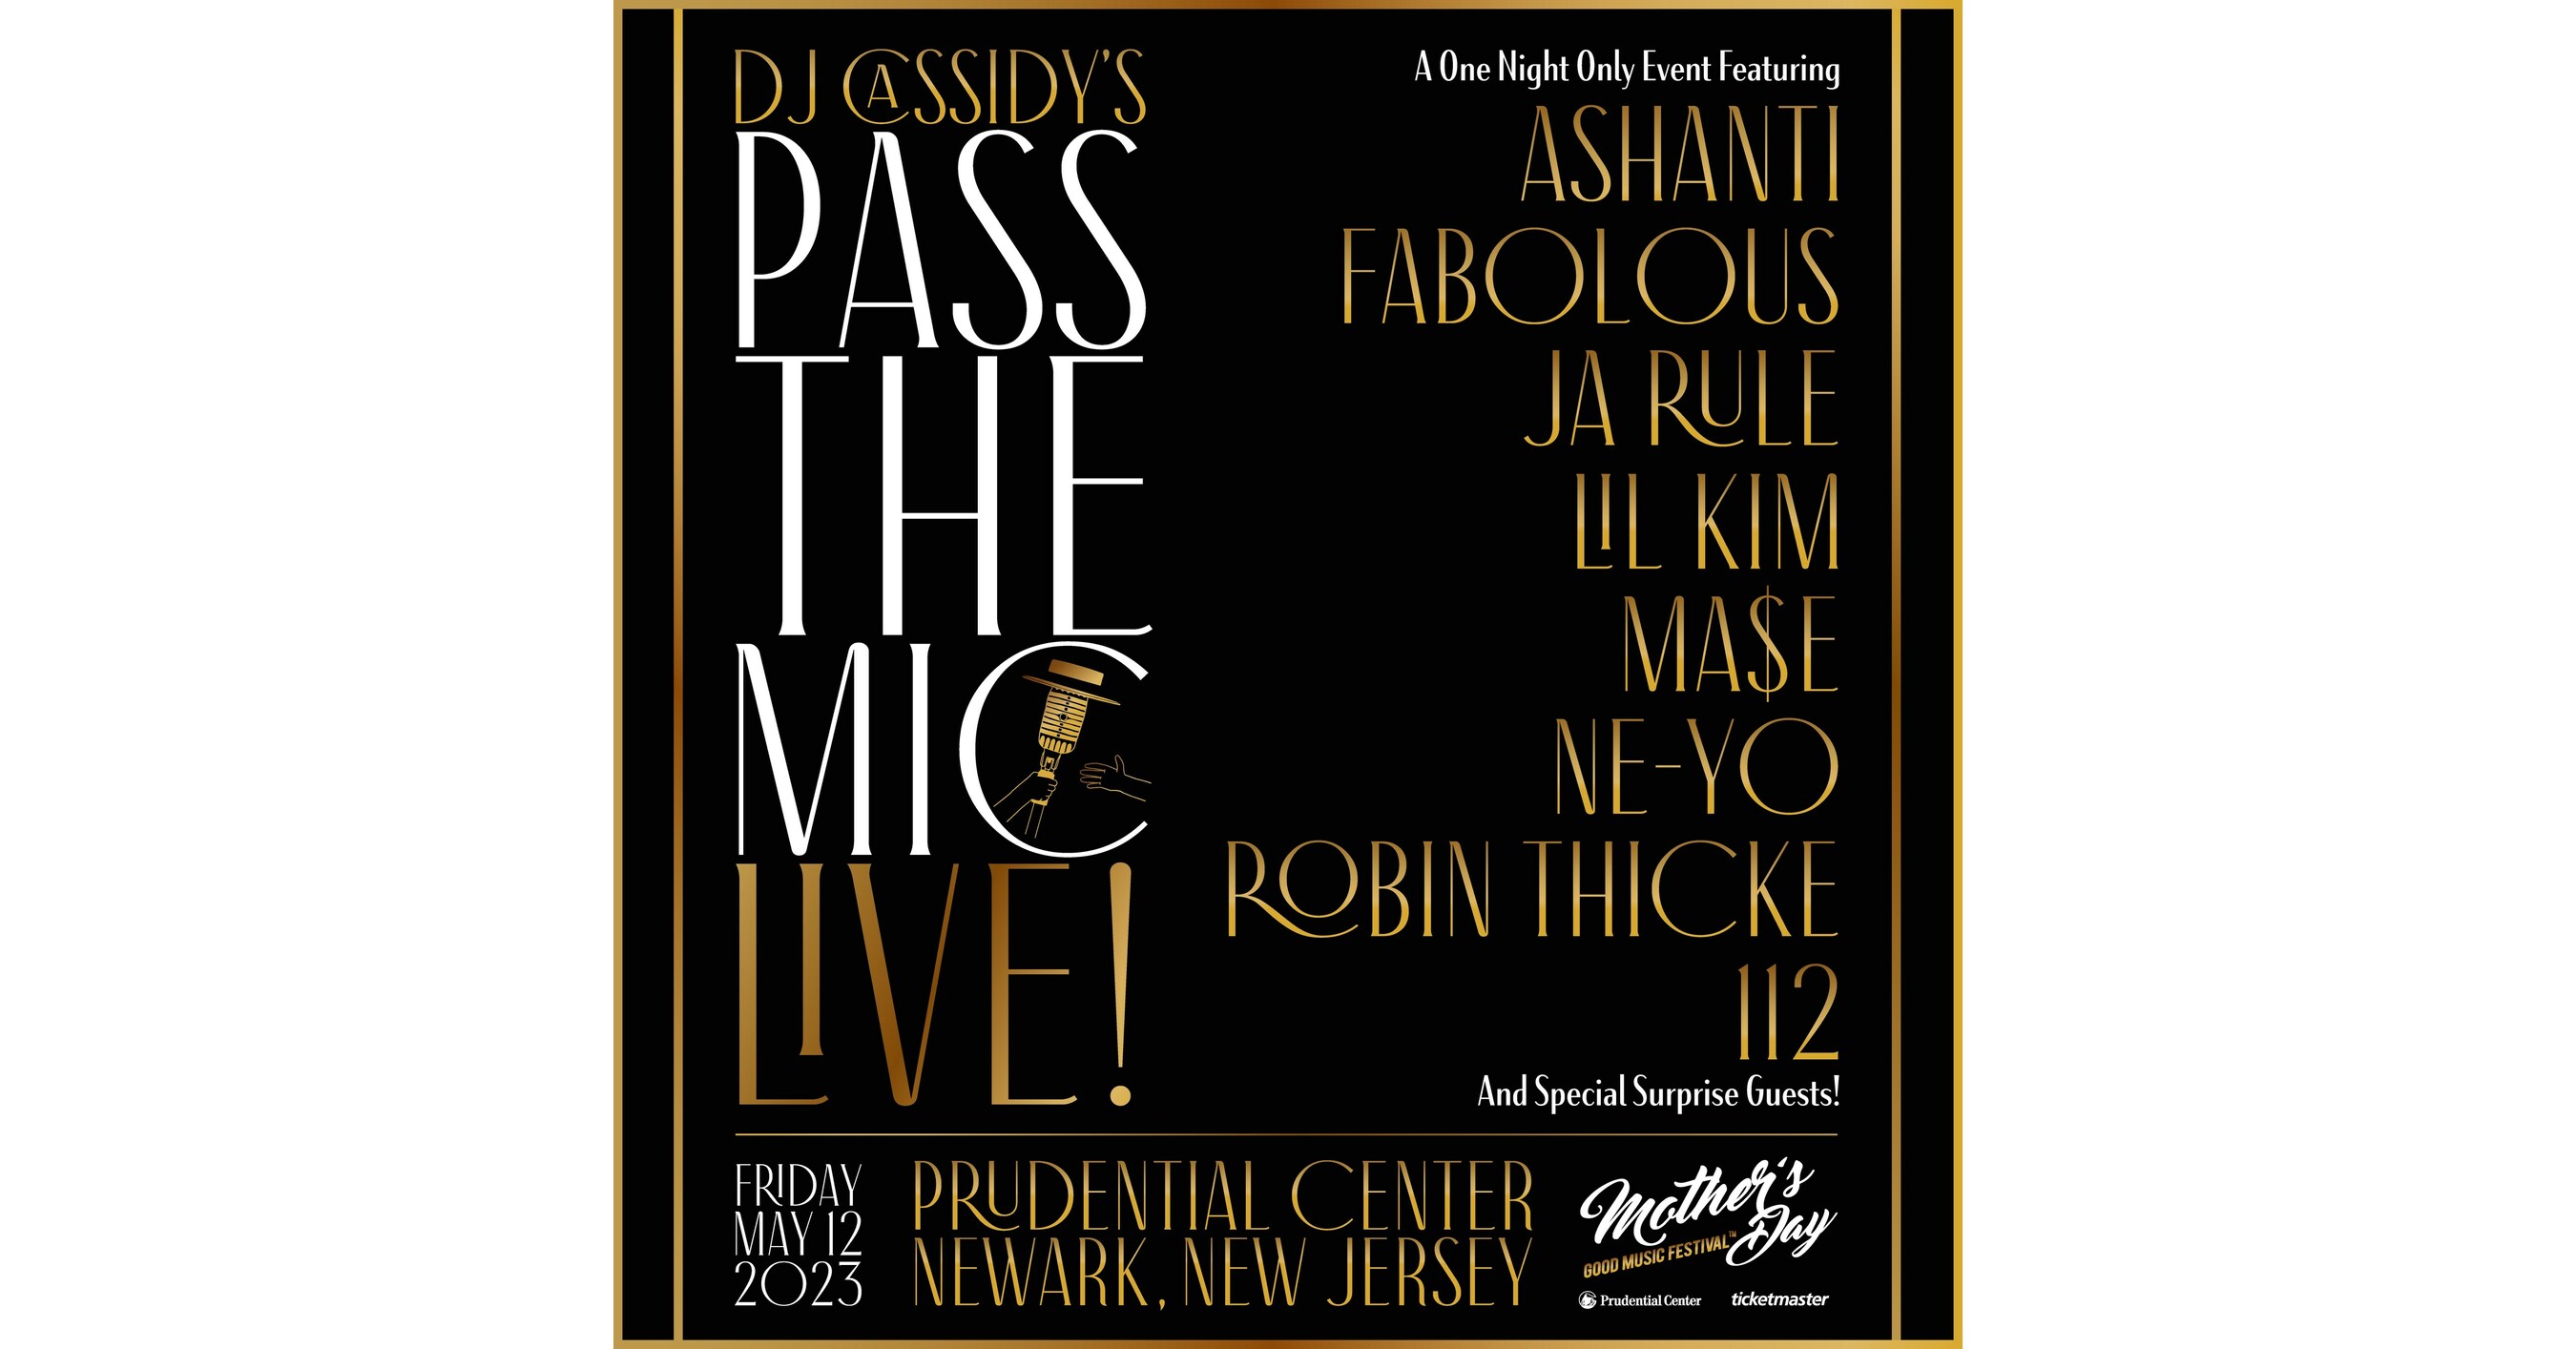 DJ CASSIDY TAKES HIS LAUDED TELEVISION SERIES "PASS THE MIC" ON TOUR IN